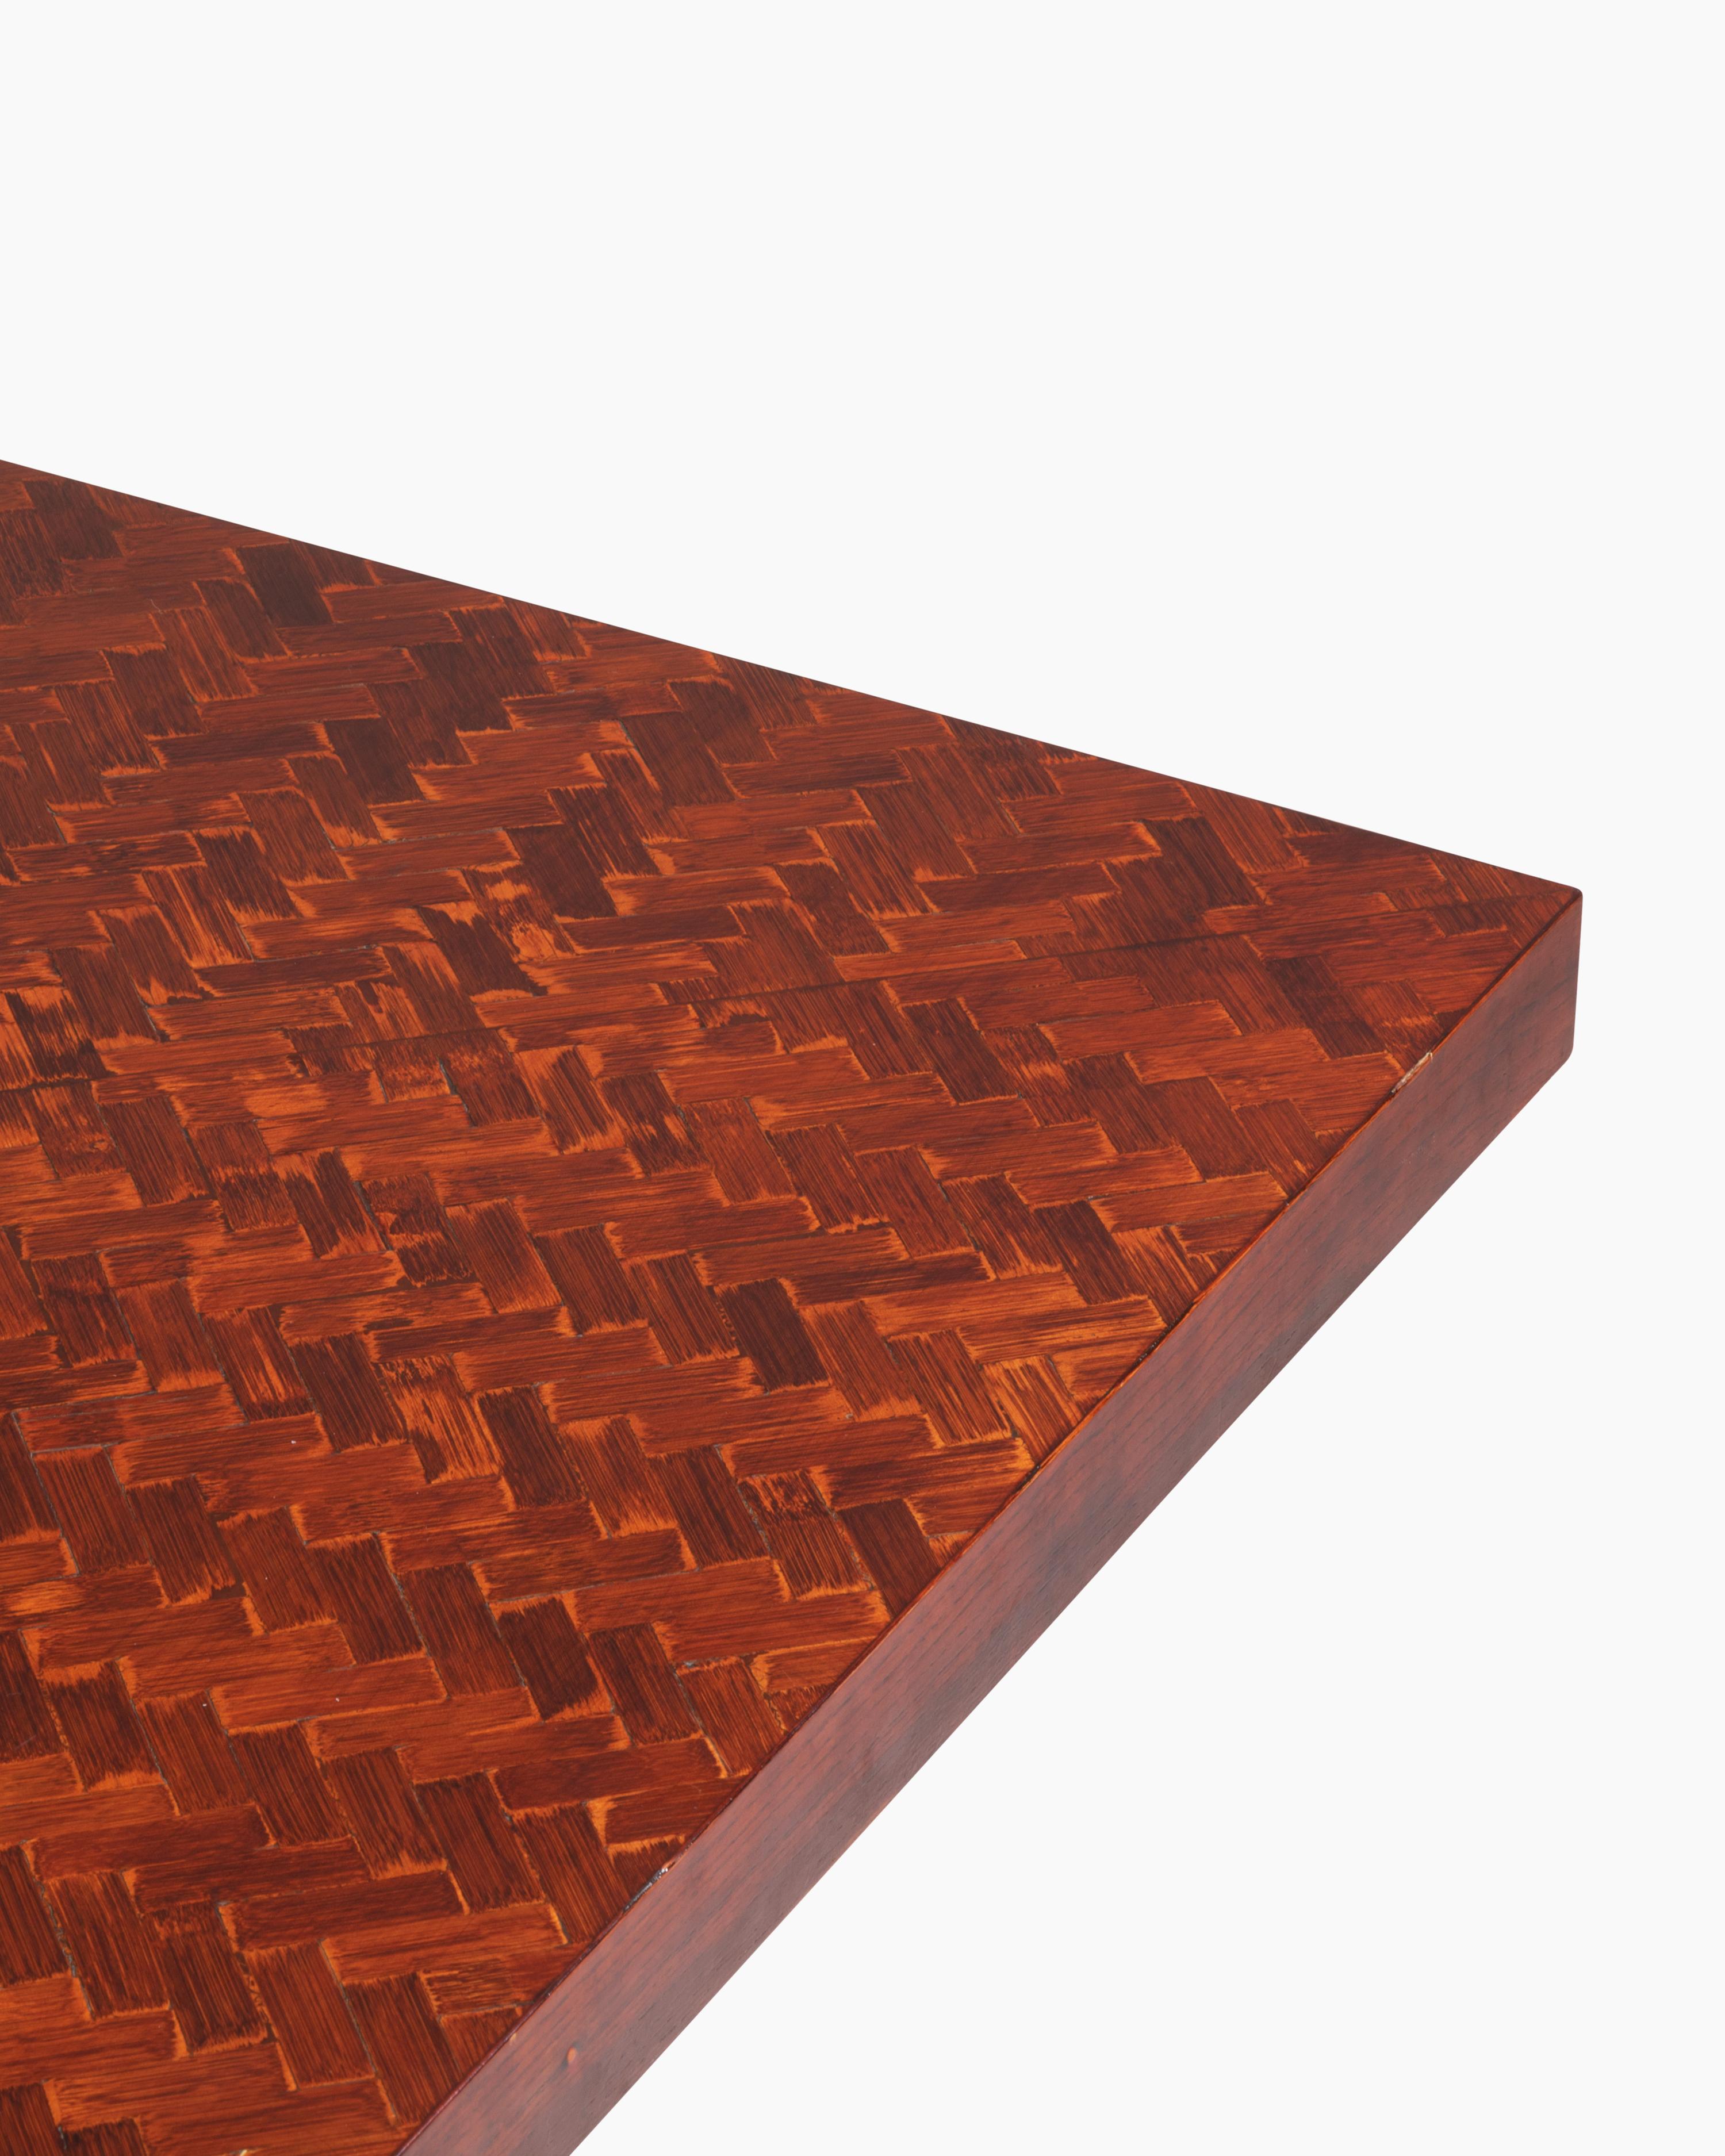 Square Dining Table for Turri with Dyed Banana Leaf Weaving ontop of Wood, 1970s For Sale 1